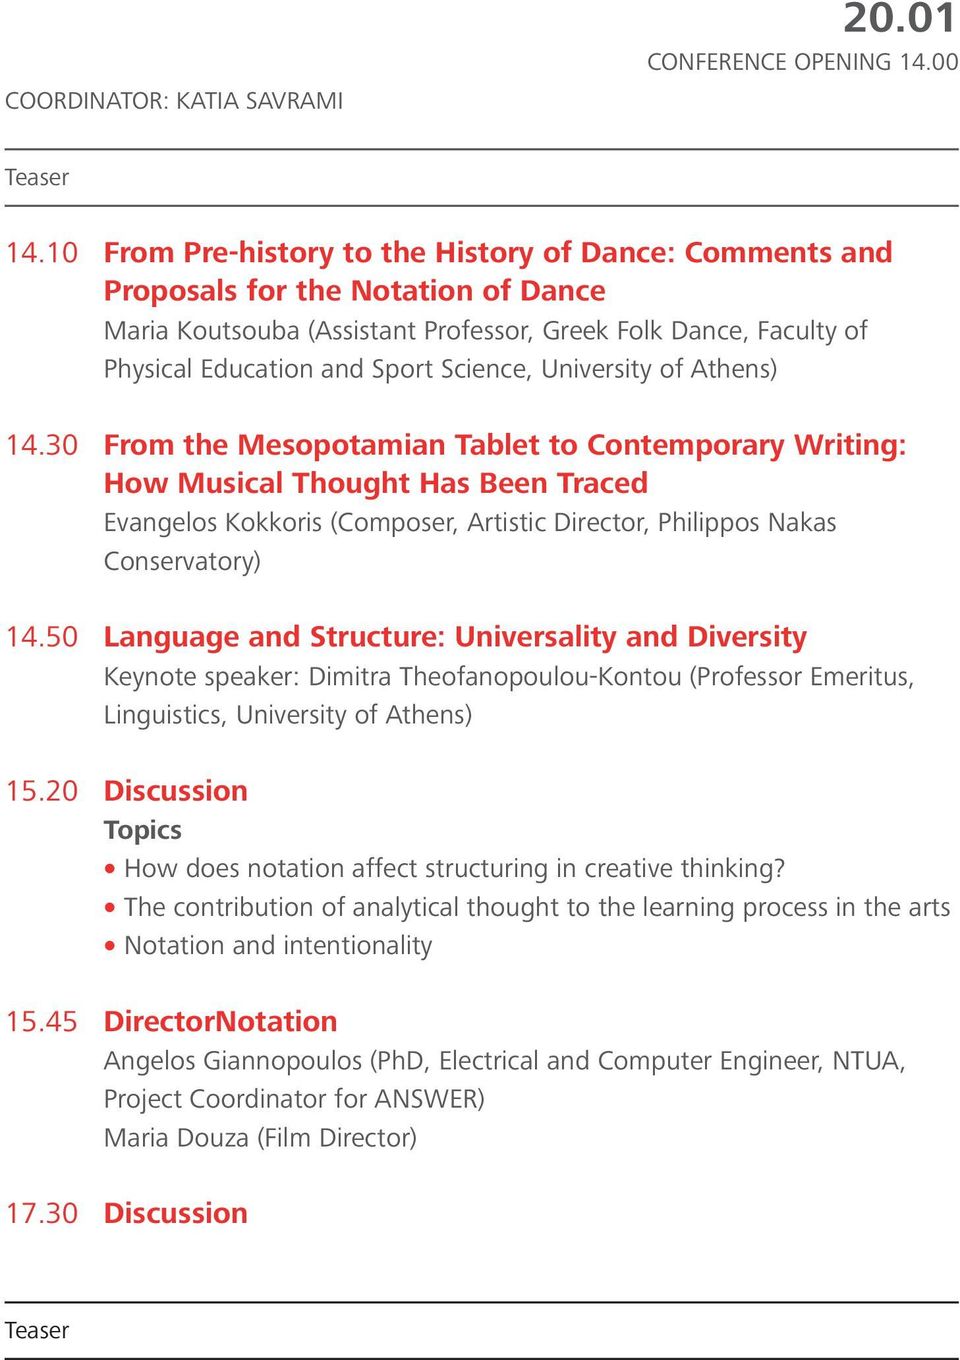 University of Athens) 14.30 From the Mesopotamian Tablet to Contemporary Writing: How Musical Thought Has Been Traced Evangelos Kokkoris (Composer, Artistic Director, Philippos Nakas Conservatory) 14.